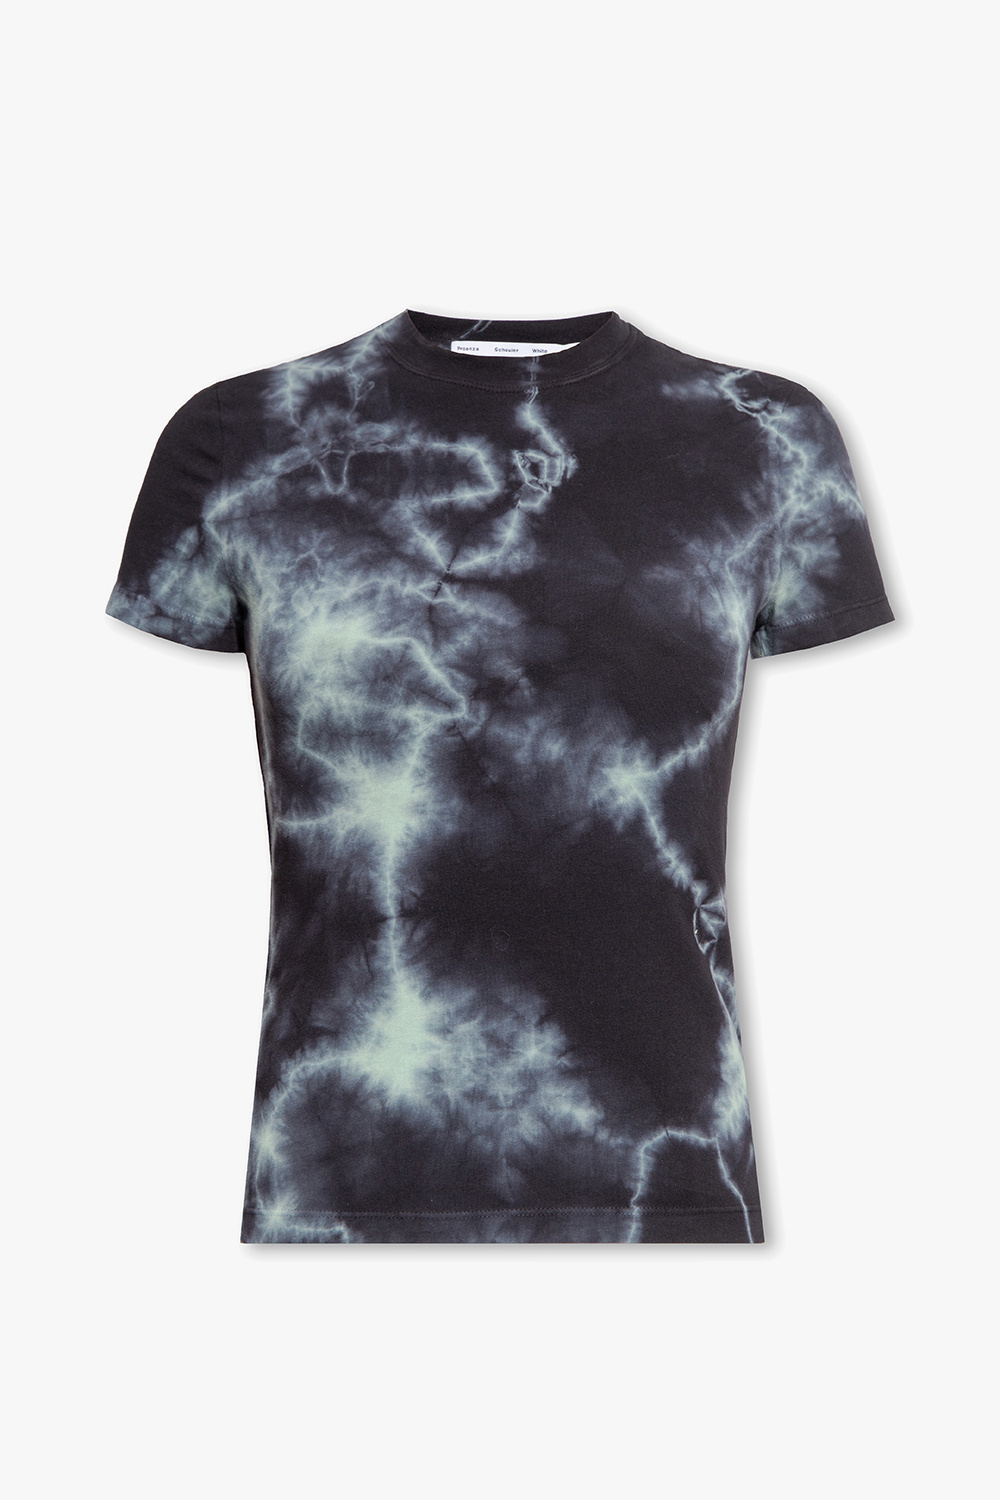 Proenza Schouler White Label Tie-dyed T-shirt